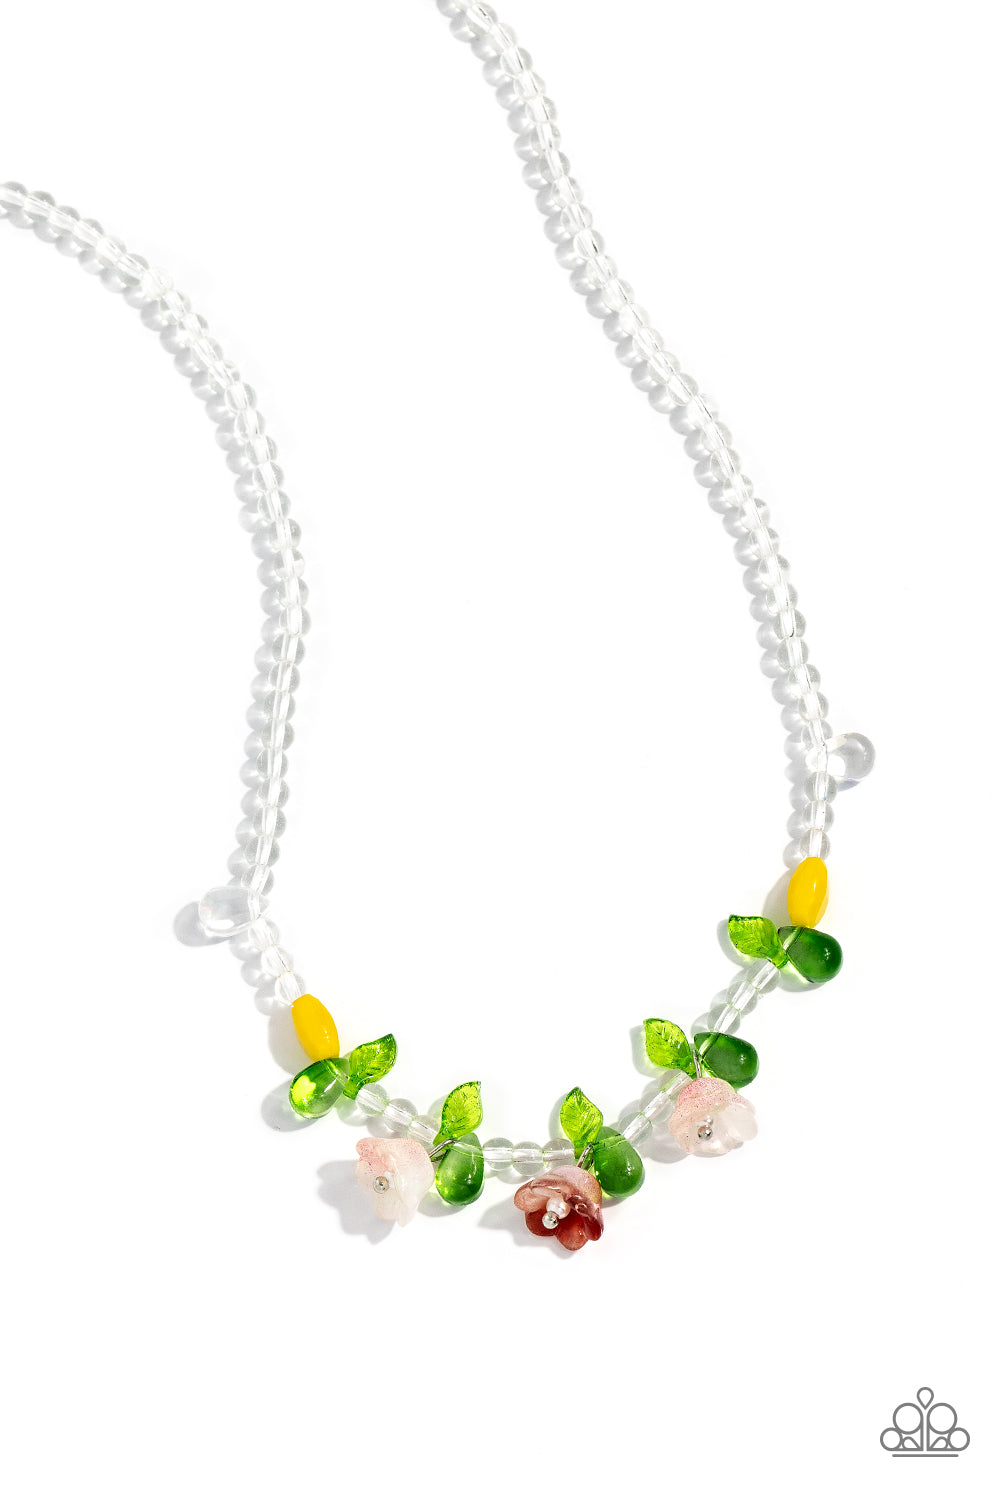 World GLASS Wonder Orange Necklace - Paparazzi Accessories  A spring-inspired collection of glassy Tender Peach and Burnt Sienna three-dimensional flowers, glassy green teardrop beads, faceted lemon beads, and glassy, textured green leaves are infused along a strand of shimmery clear beads through an invisible wire, creating a whimsical display. Features an adjustable clasp closure.  Sold as one individual necklace. Includes one pair of matching earrings.  P2DA-OGXX-082XX